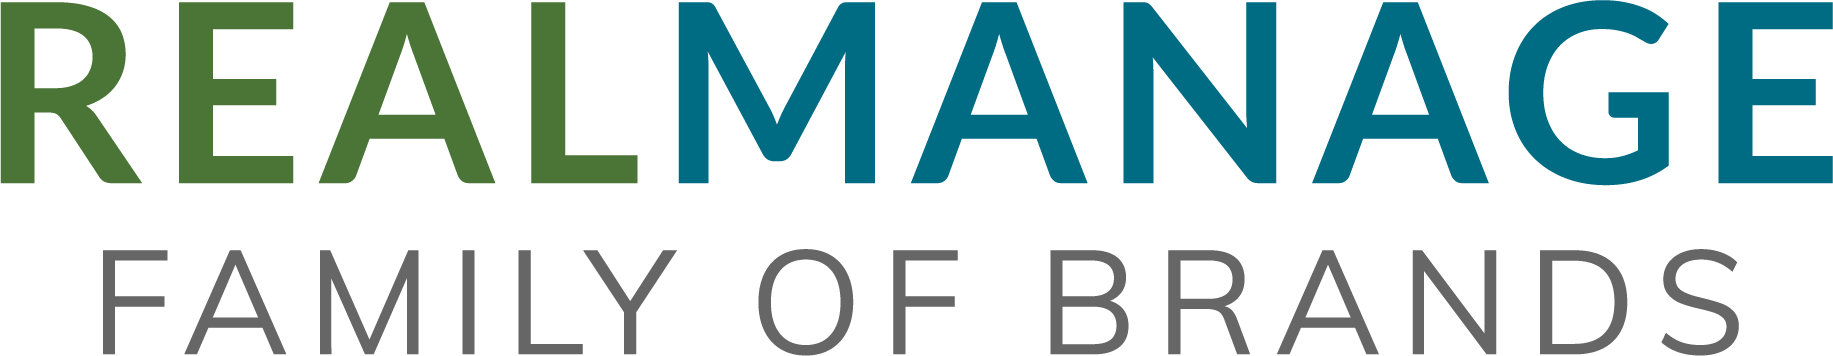 RealManage Family of Brands - Tampa logo